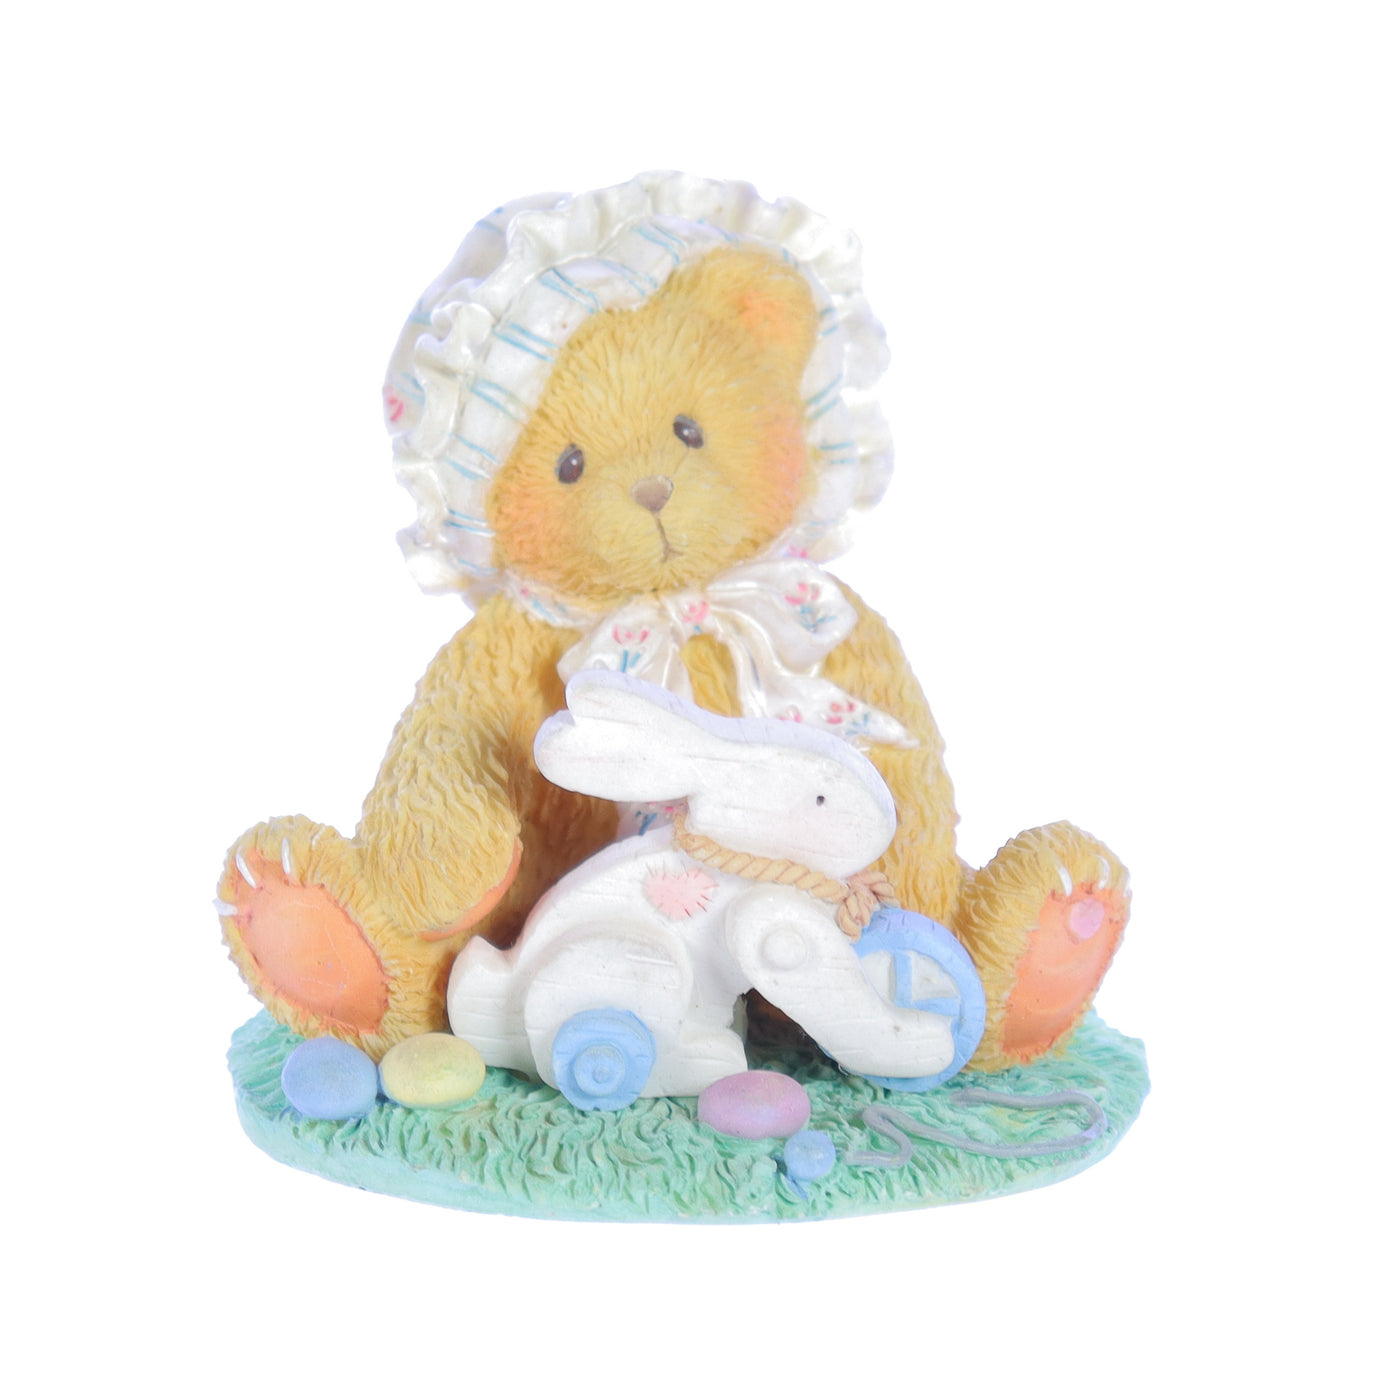 Melissa - "Every Bunny Needs A Friend" | # 103829 (Pre-Owned: No Box)